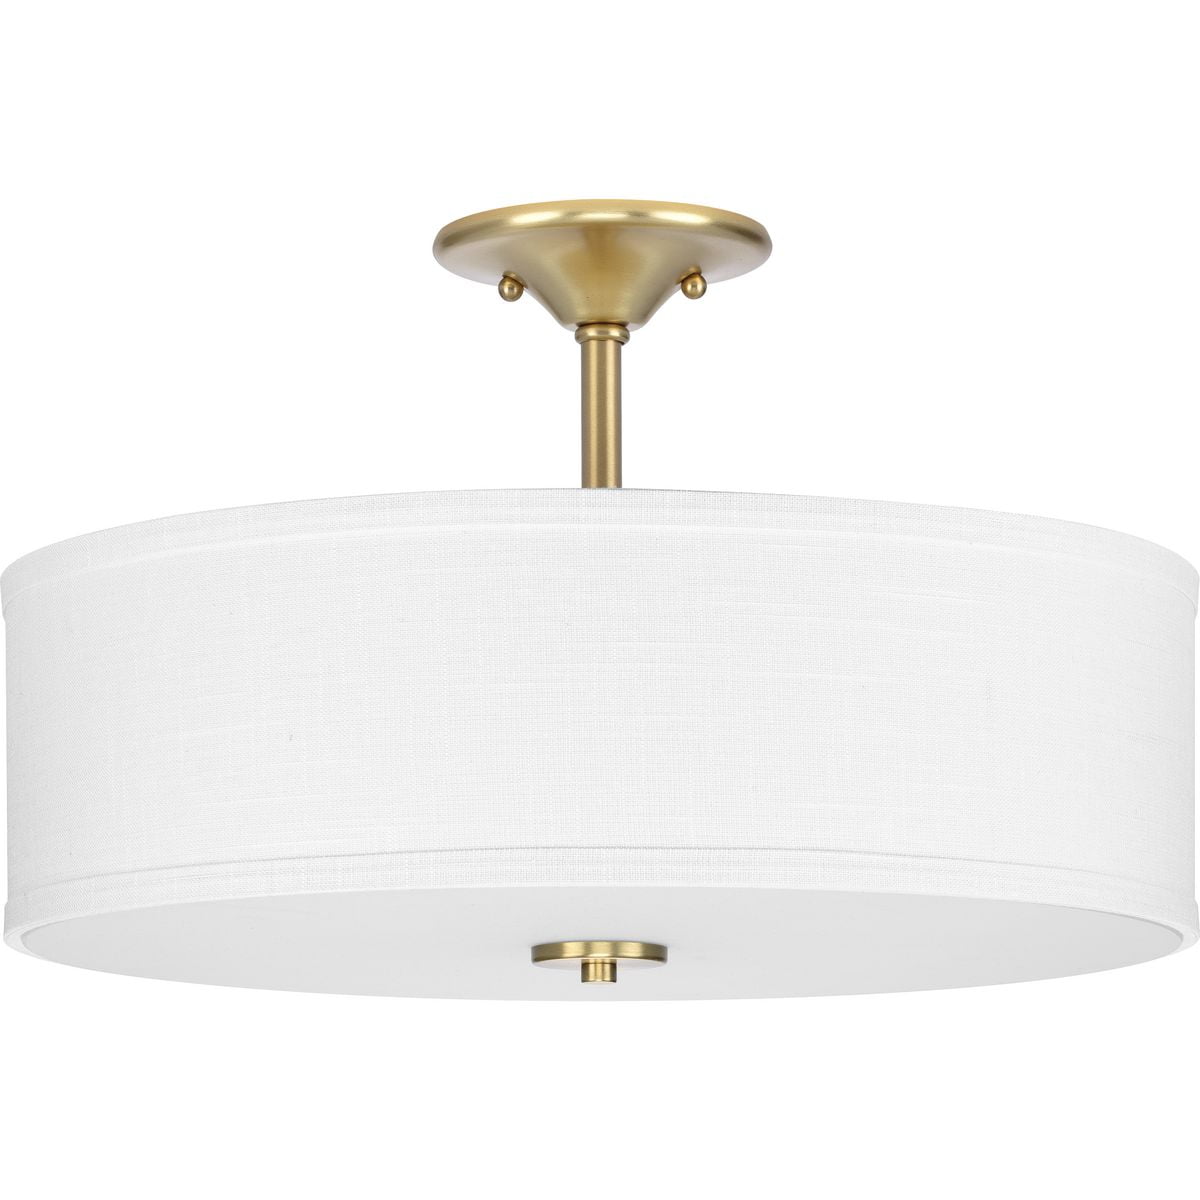 Lacey 28 5 Light Semi Flush in Pewter